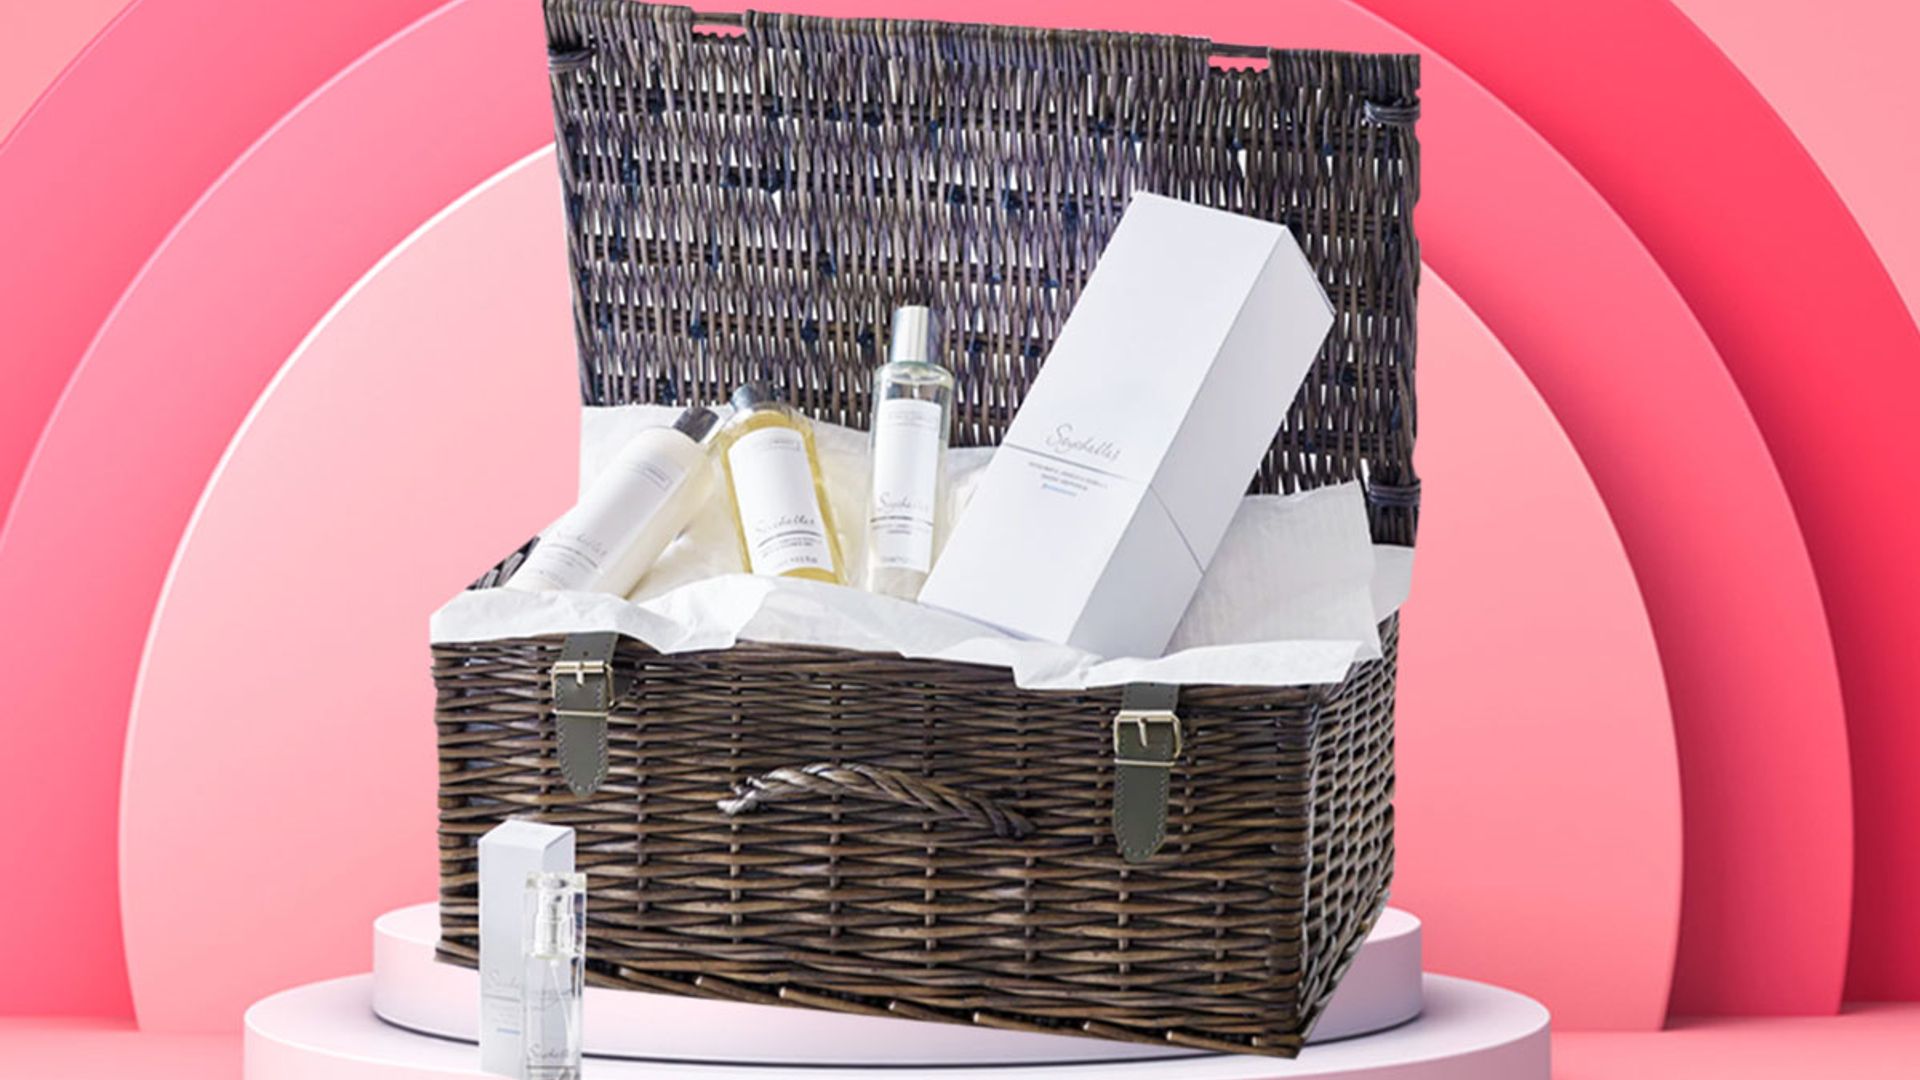 The World’s Best Hampers To Win Your Mother’s Heart